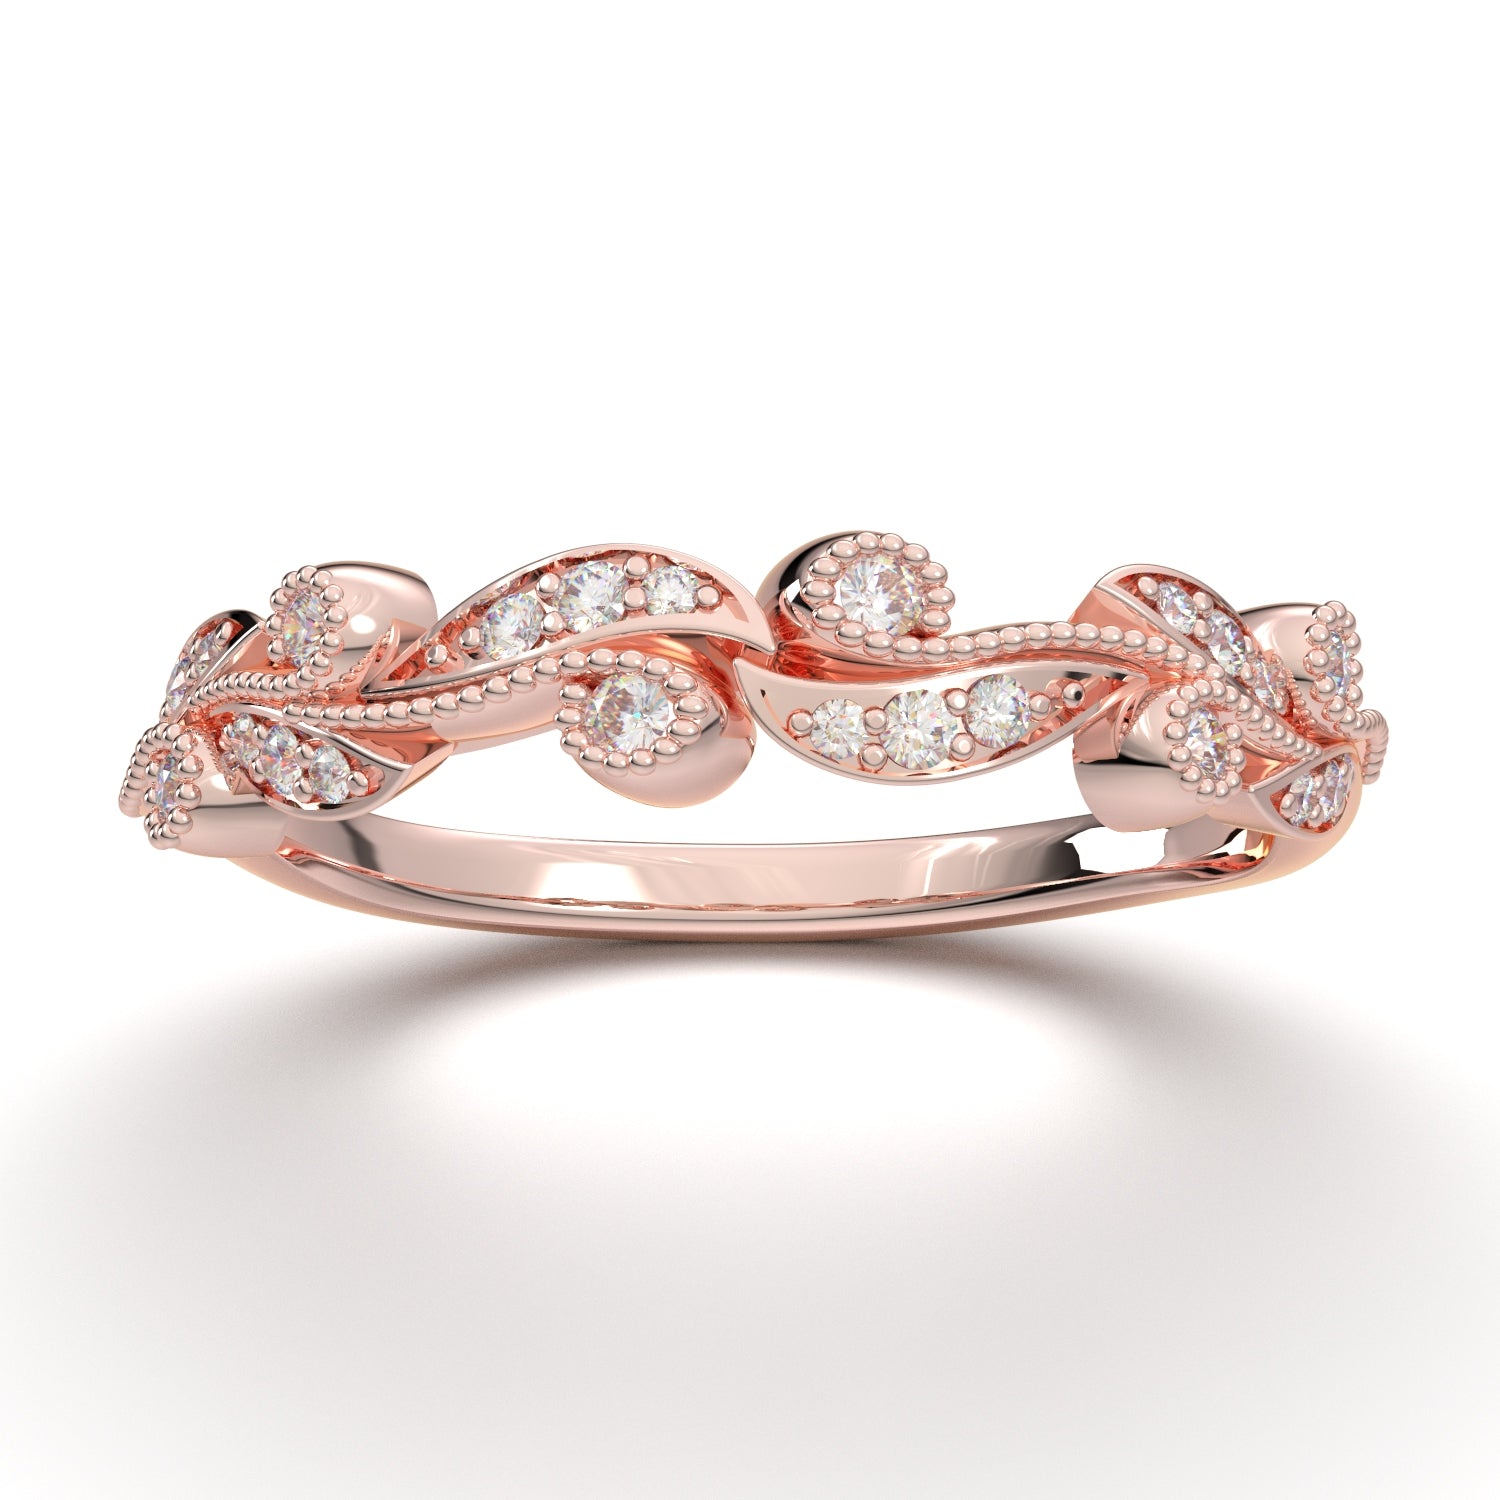 Floral & Flower Wedding Bands: Bouquet for Your Forever Ring